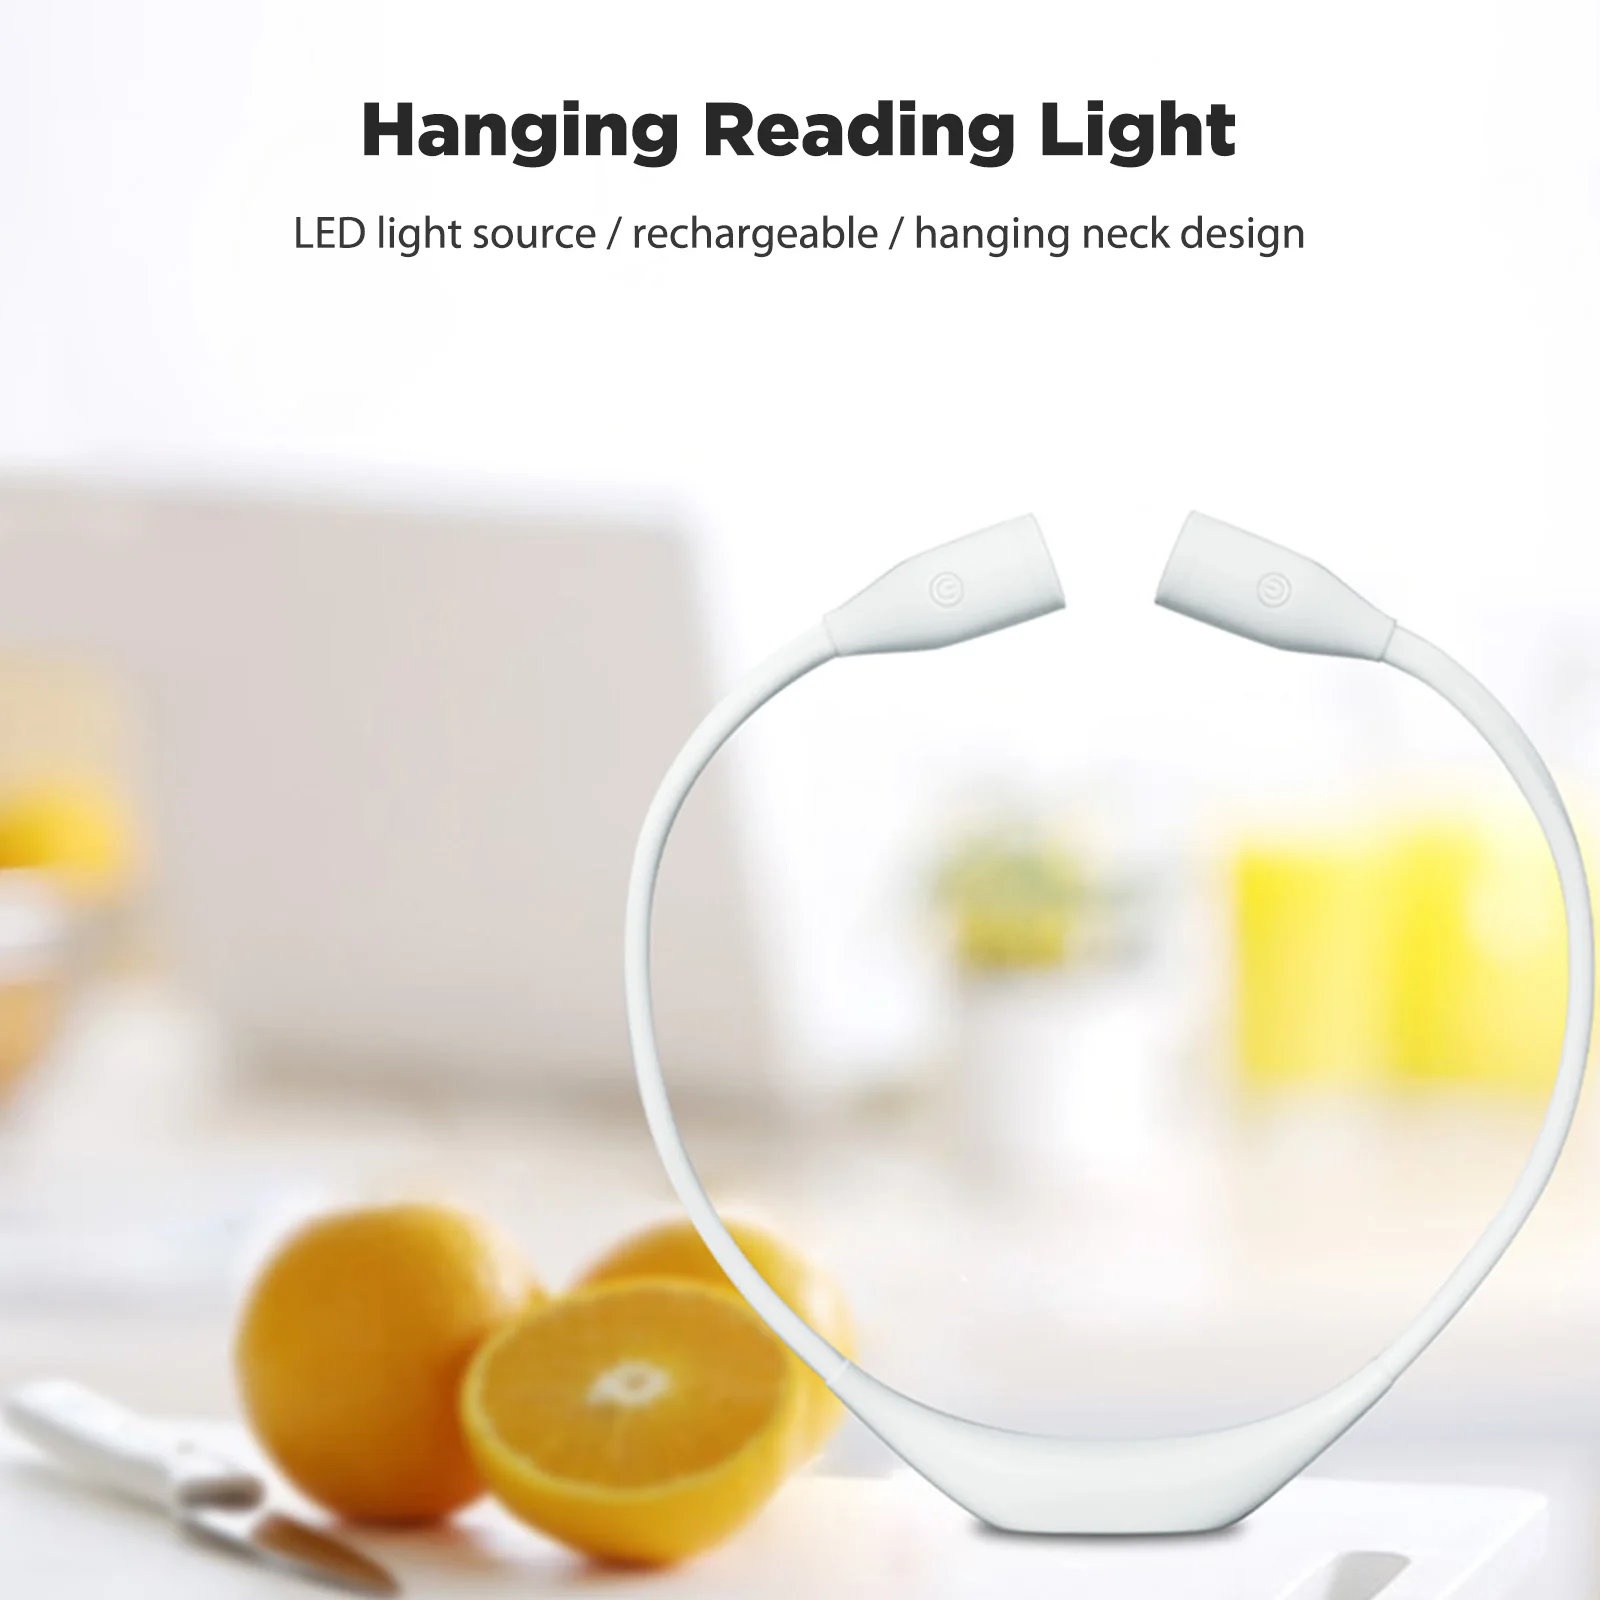 

USB LED Book Light Rechargeable Reading Lights Stepless Dimming Work Lamp 360-degree Adjustment Hands Free for Camping Repairing